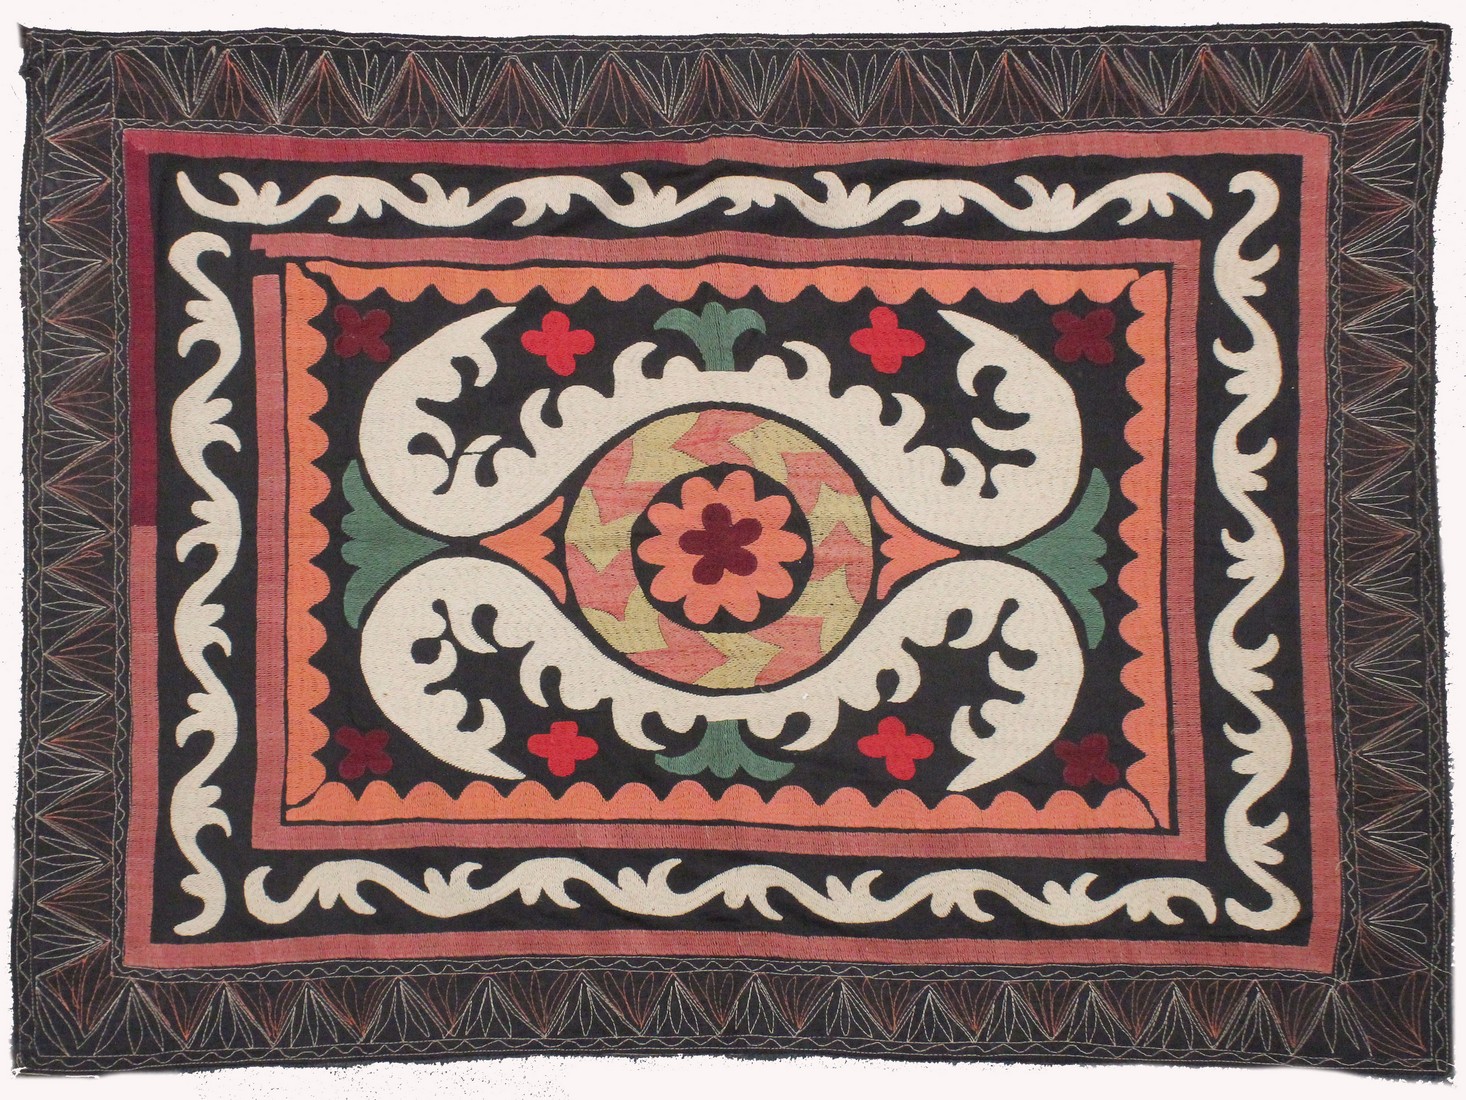 AN UZBEK SUZANI EMBROIDERED TEXTILE, with central foliate motif in orange, green, maroon, red, and